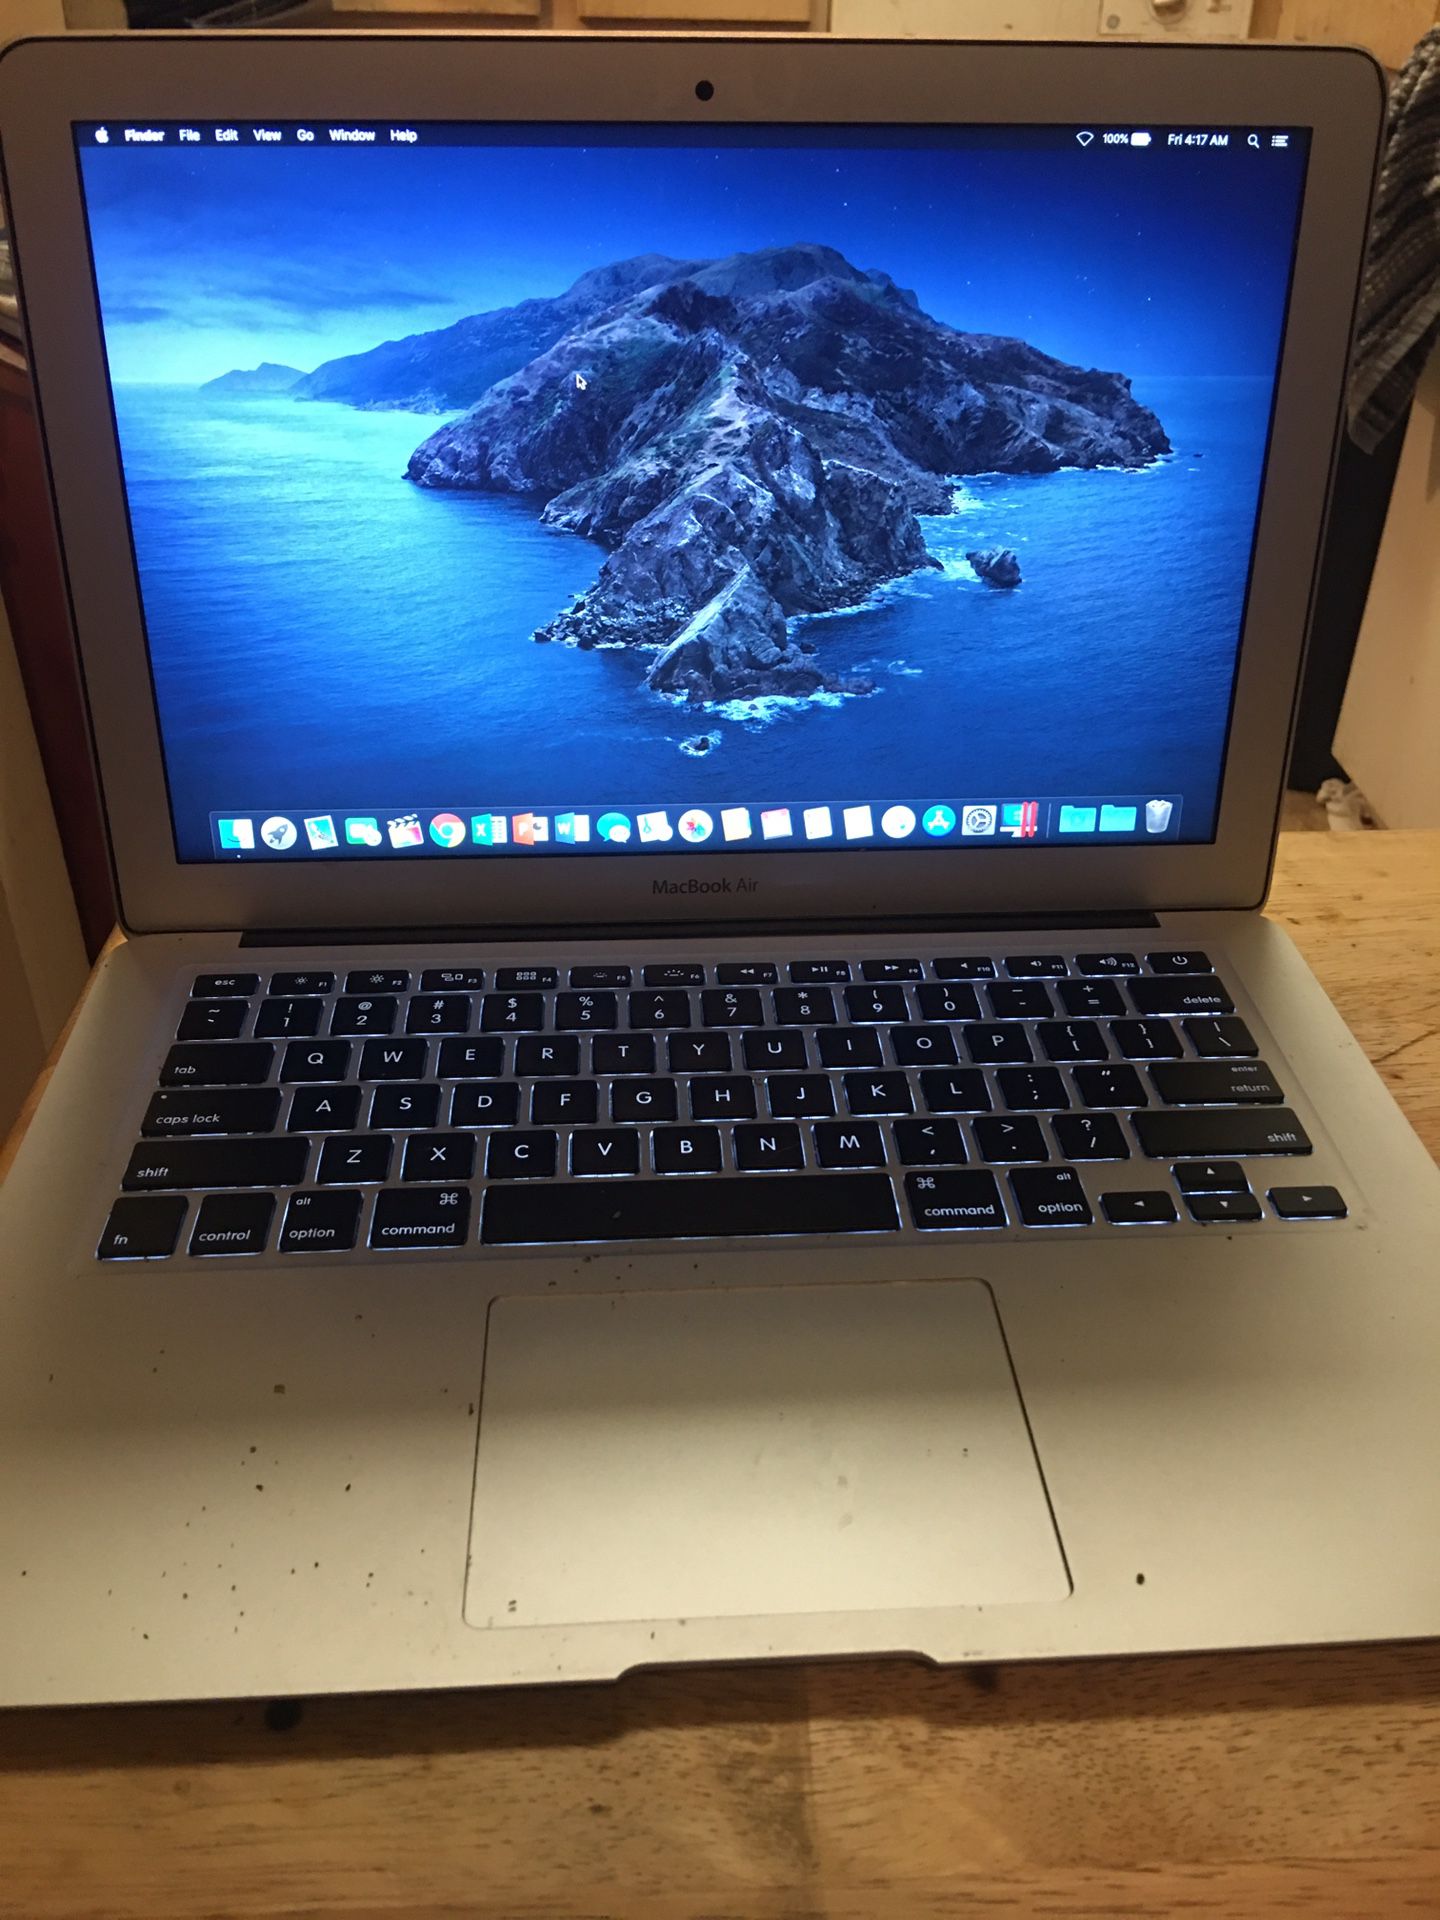 MUST GO MACBOOK AIR EARLY 2015 13.3in intel i5 processor/128gb/8gb Final Cut Pro X, Parallels desktop running Windows 10 and More